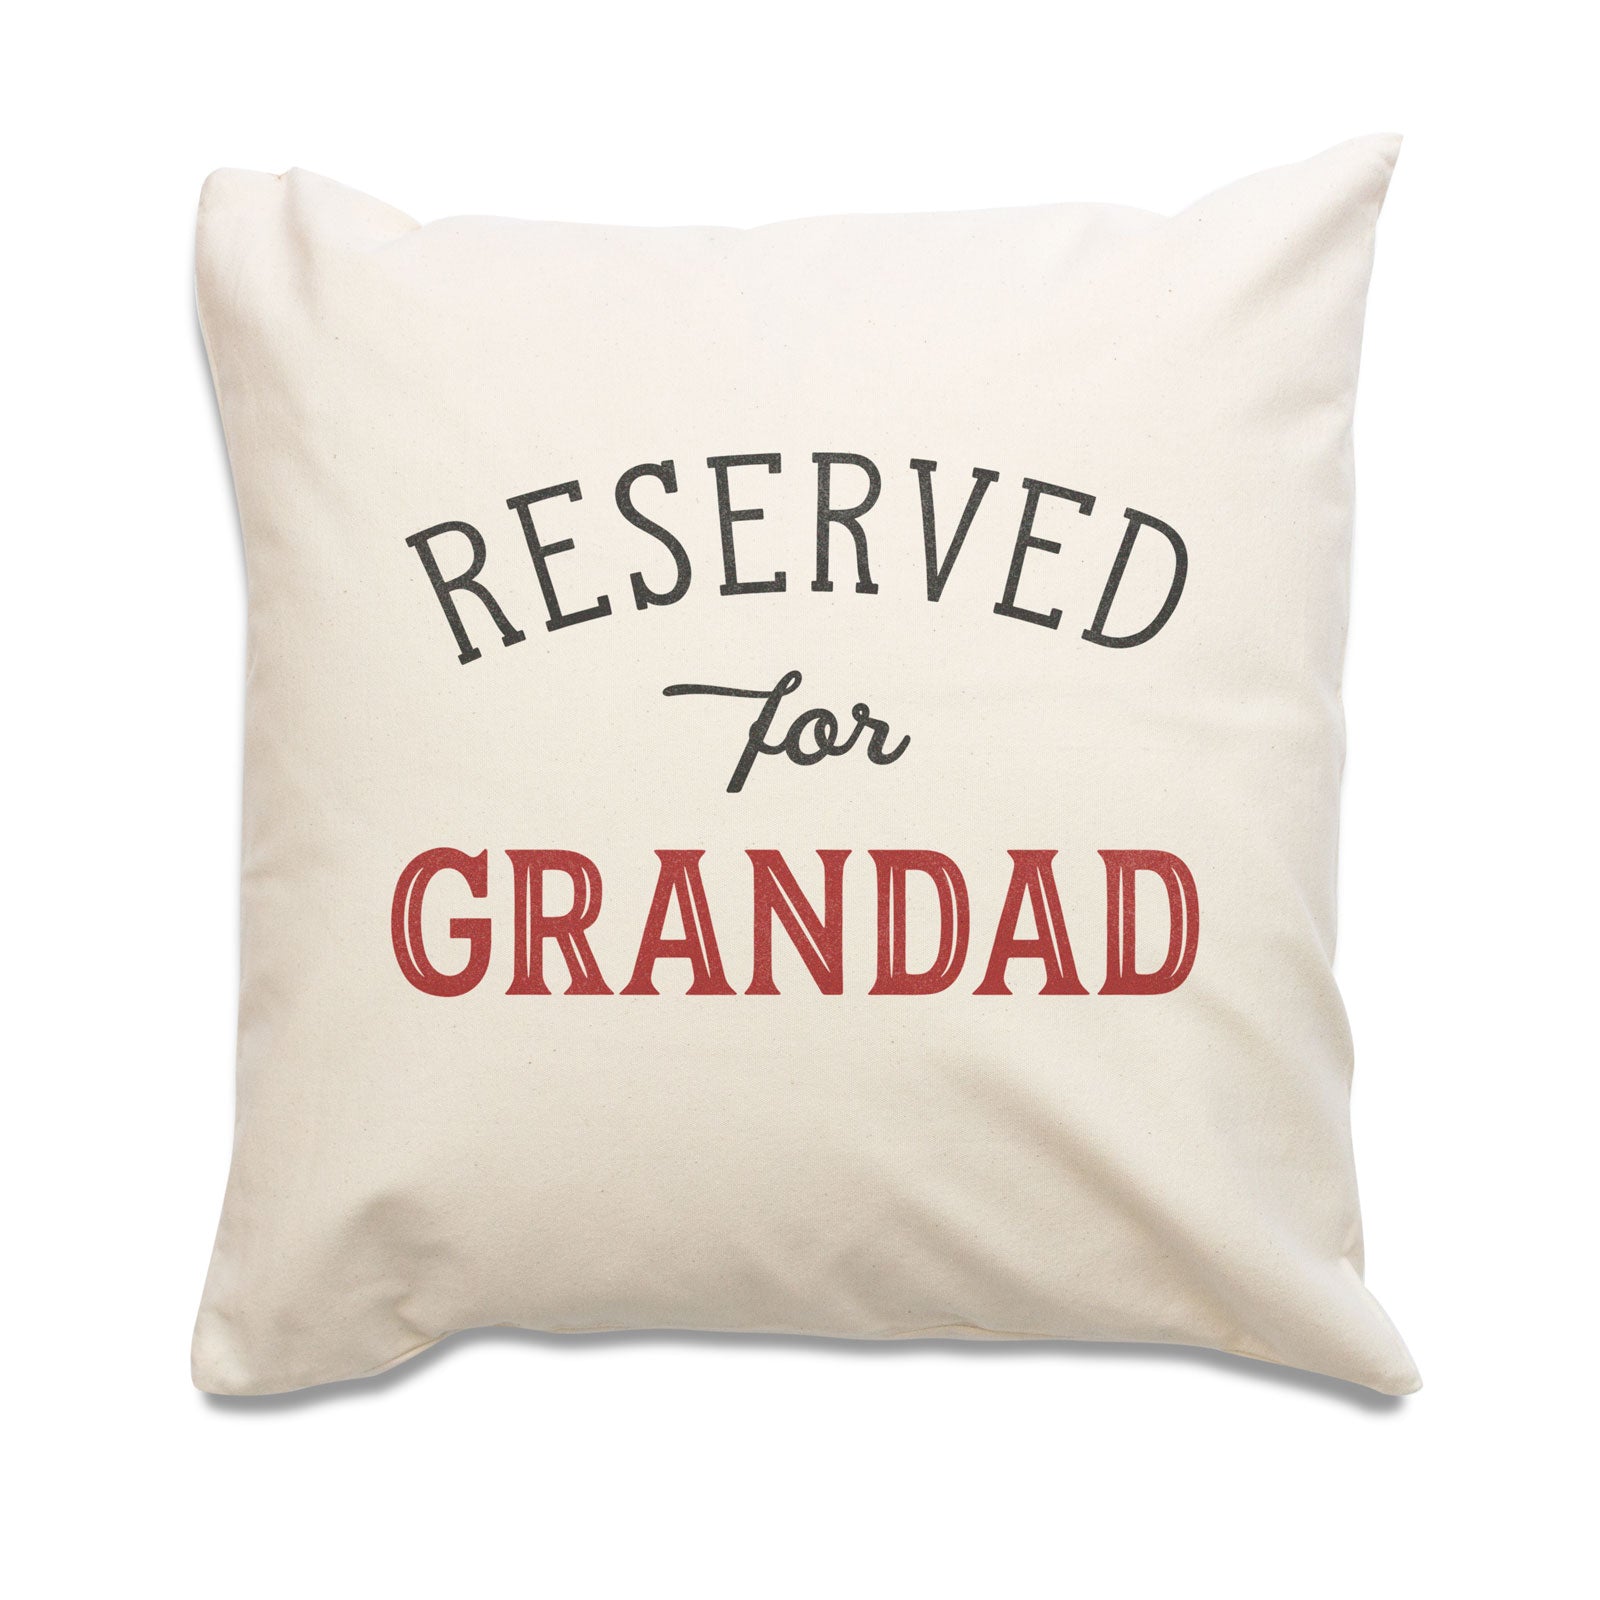 Reserved for Grandad Cushion Cover